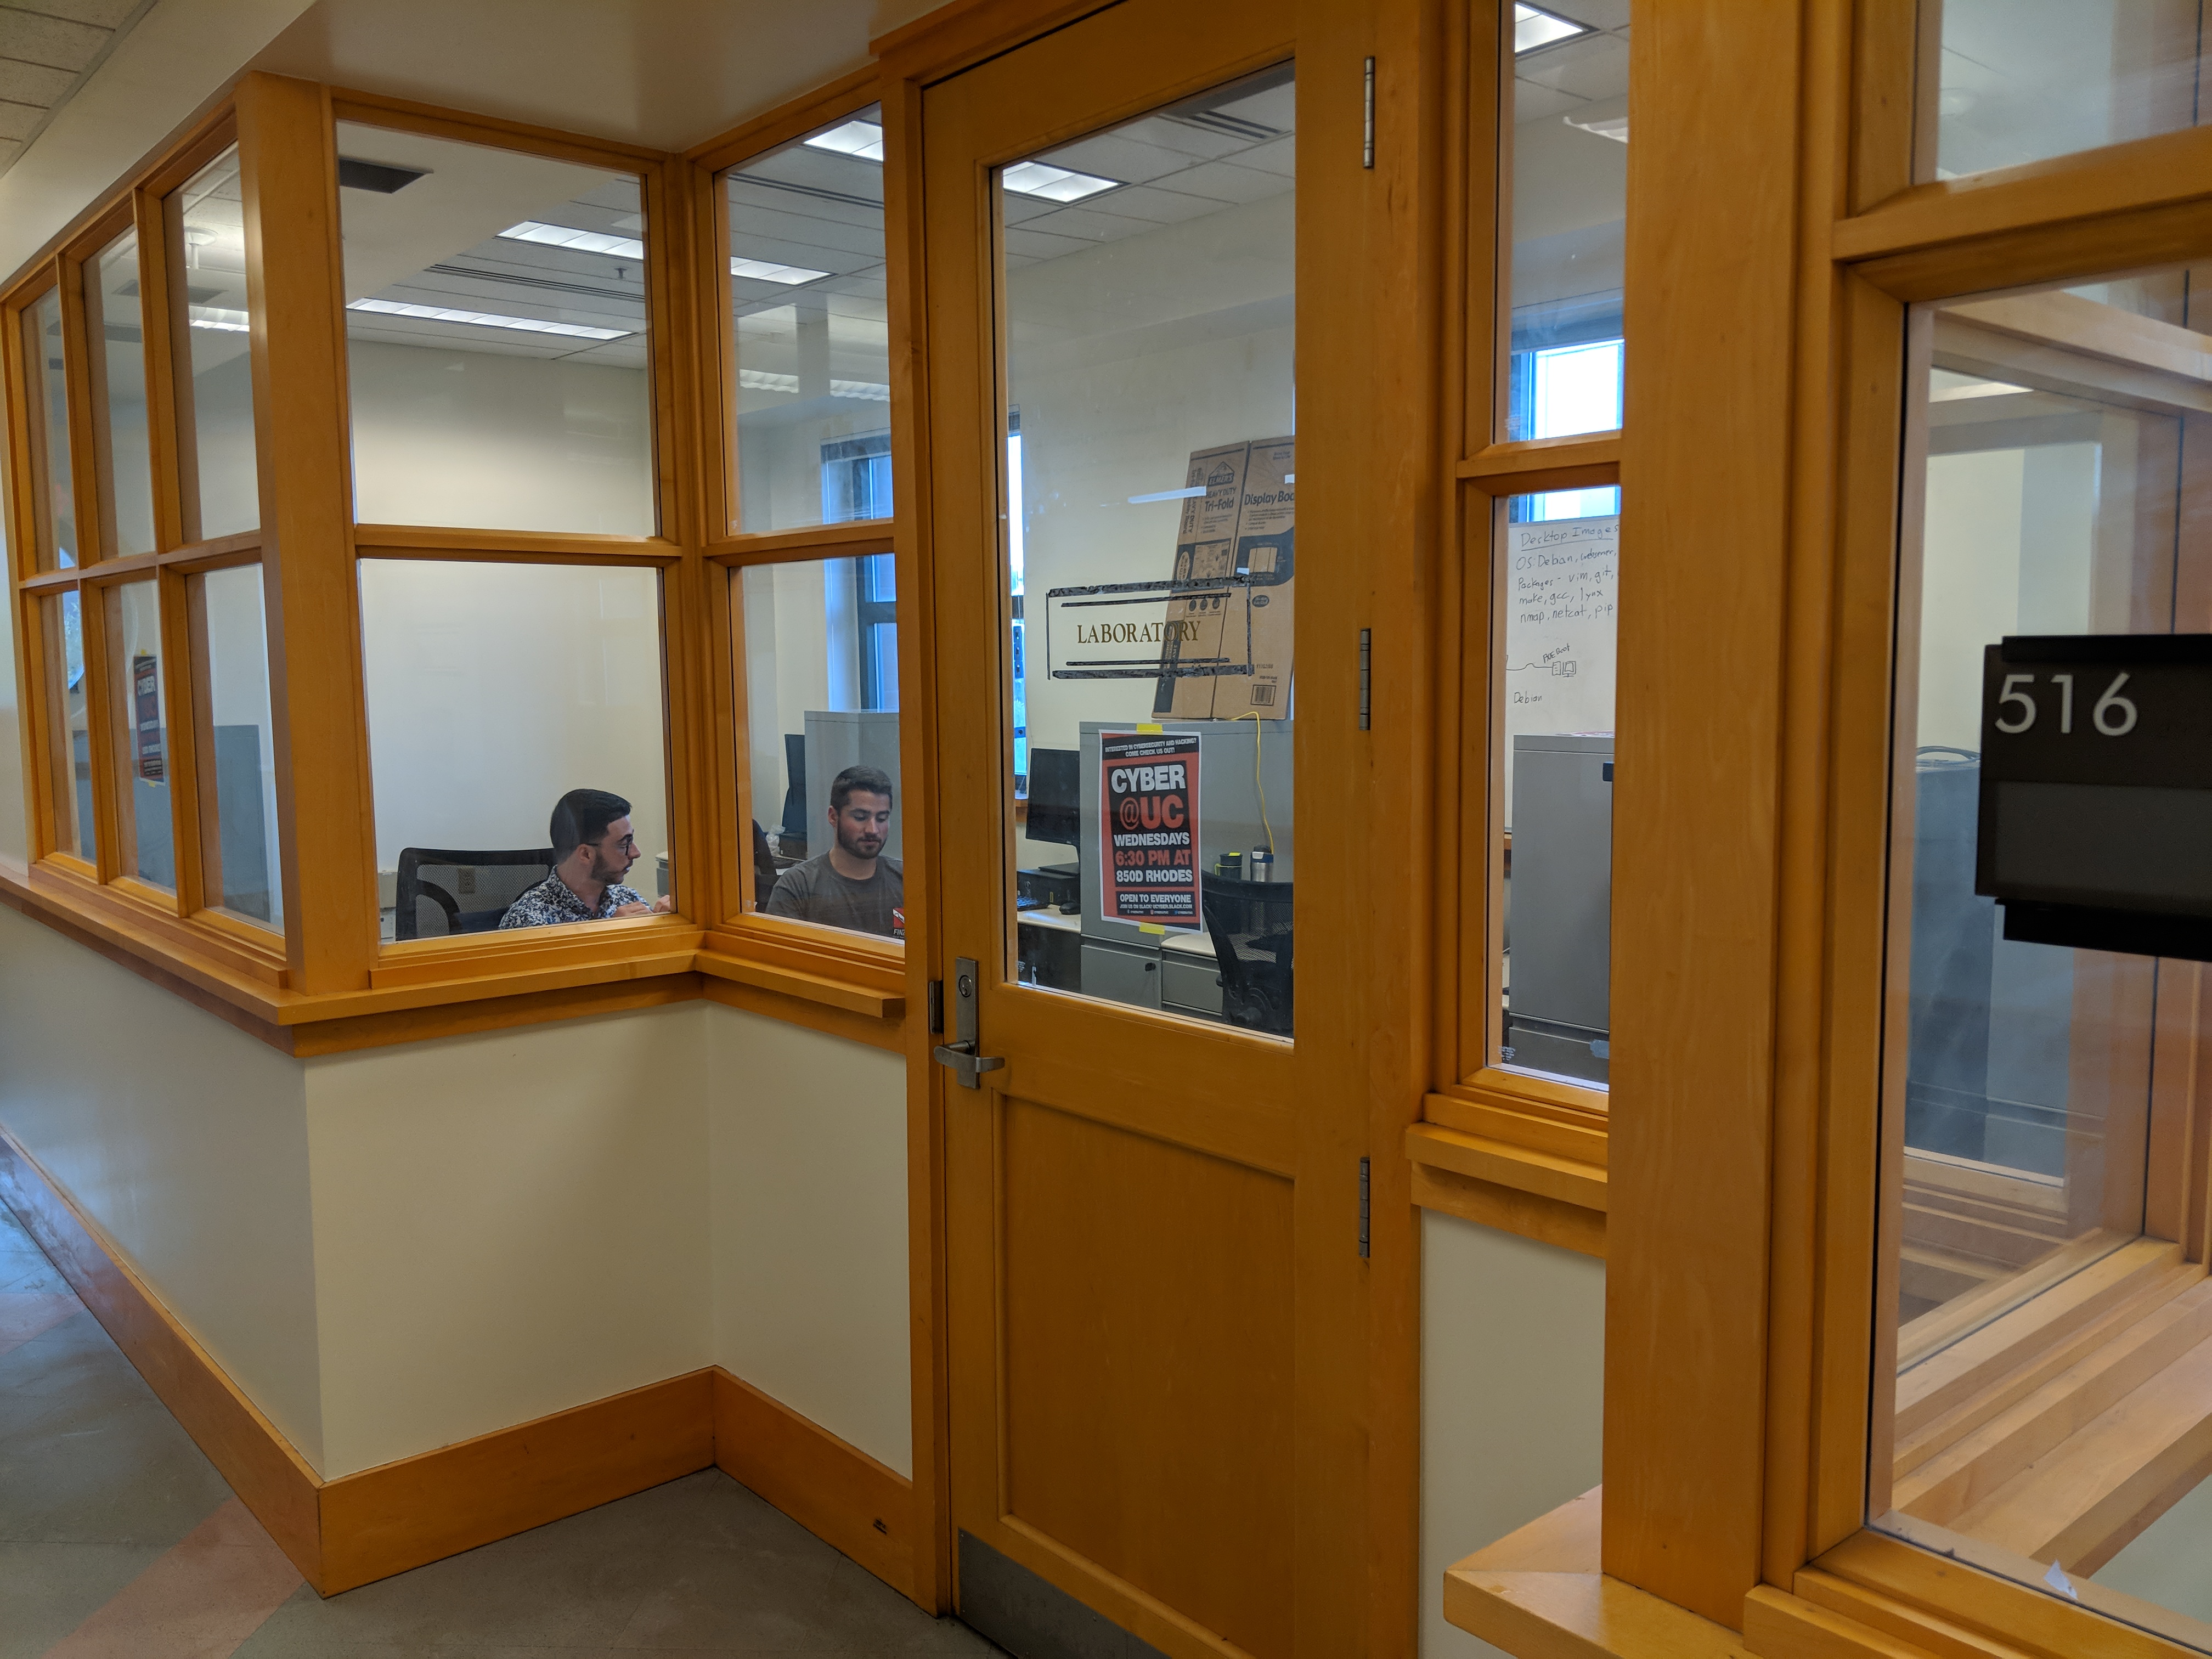 The front door to our lab room, with two students working inside